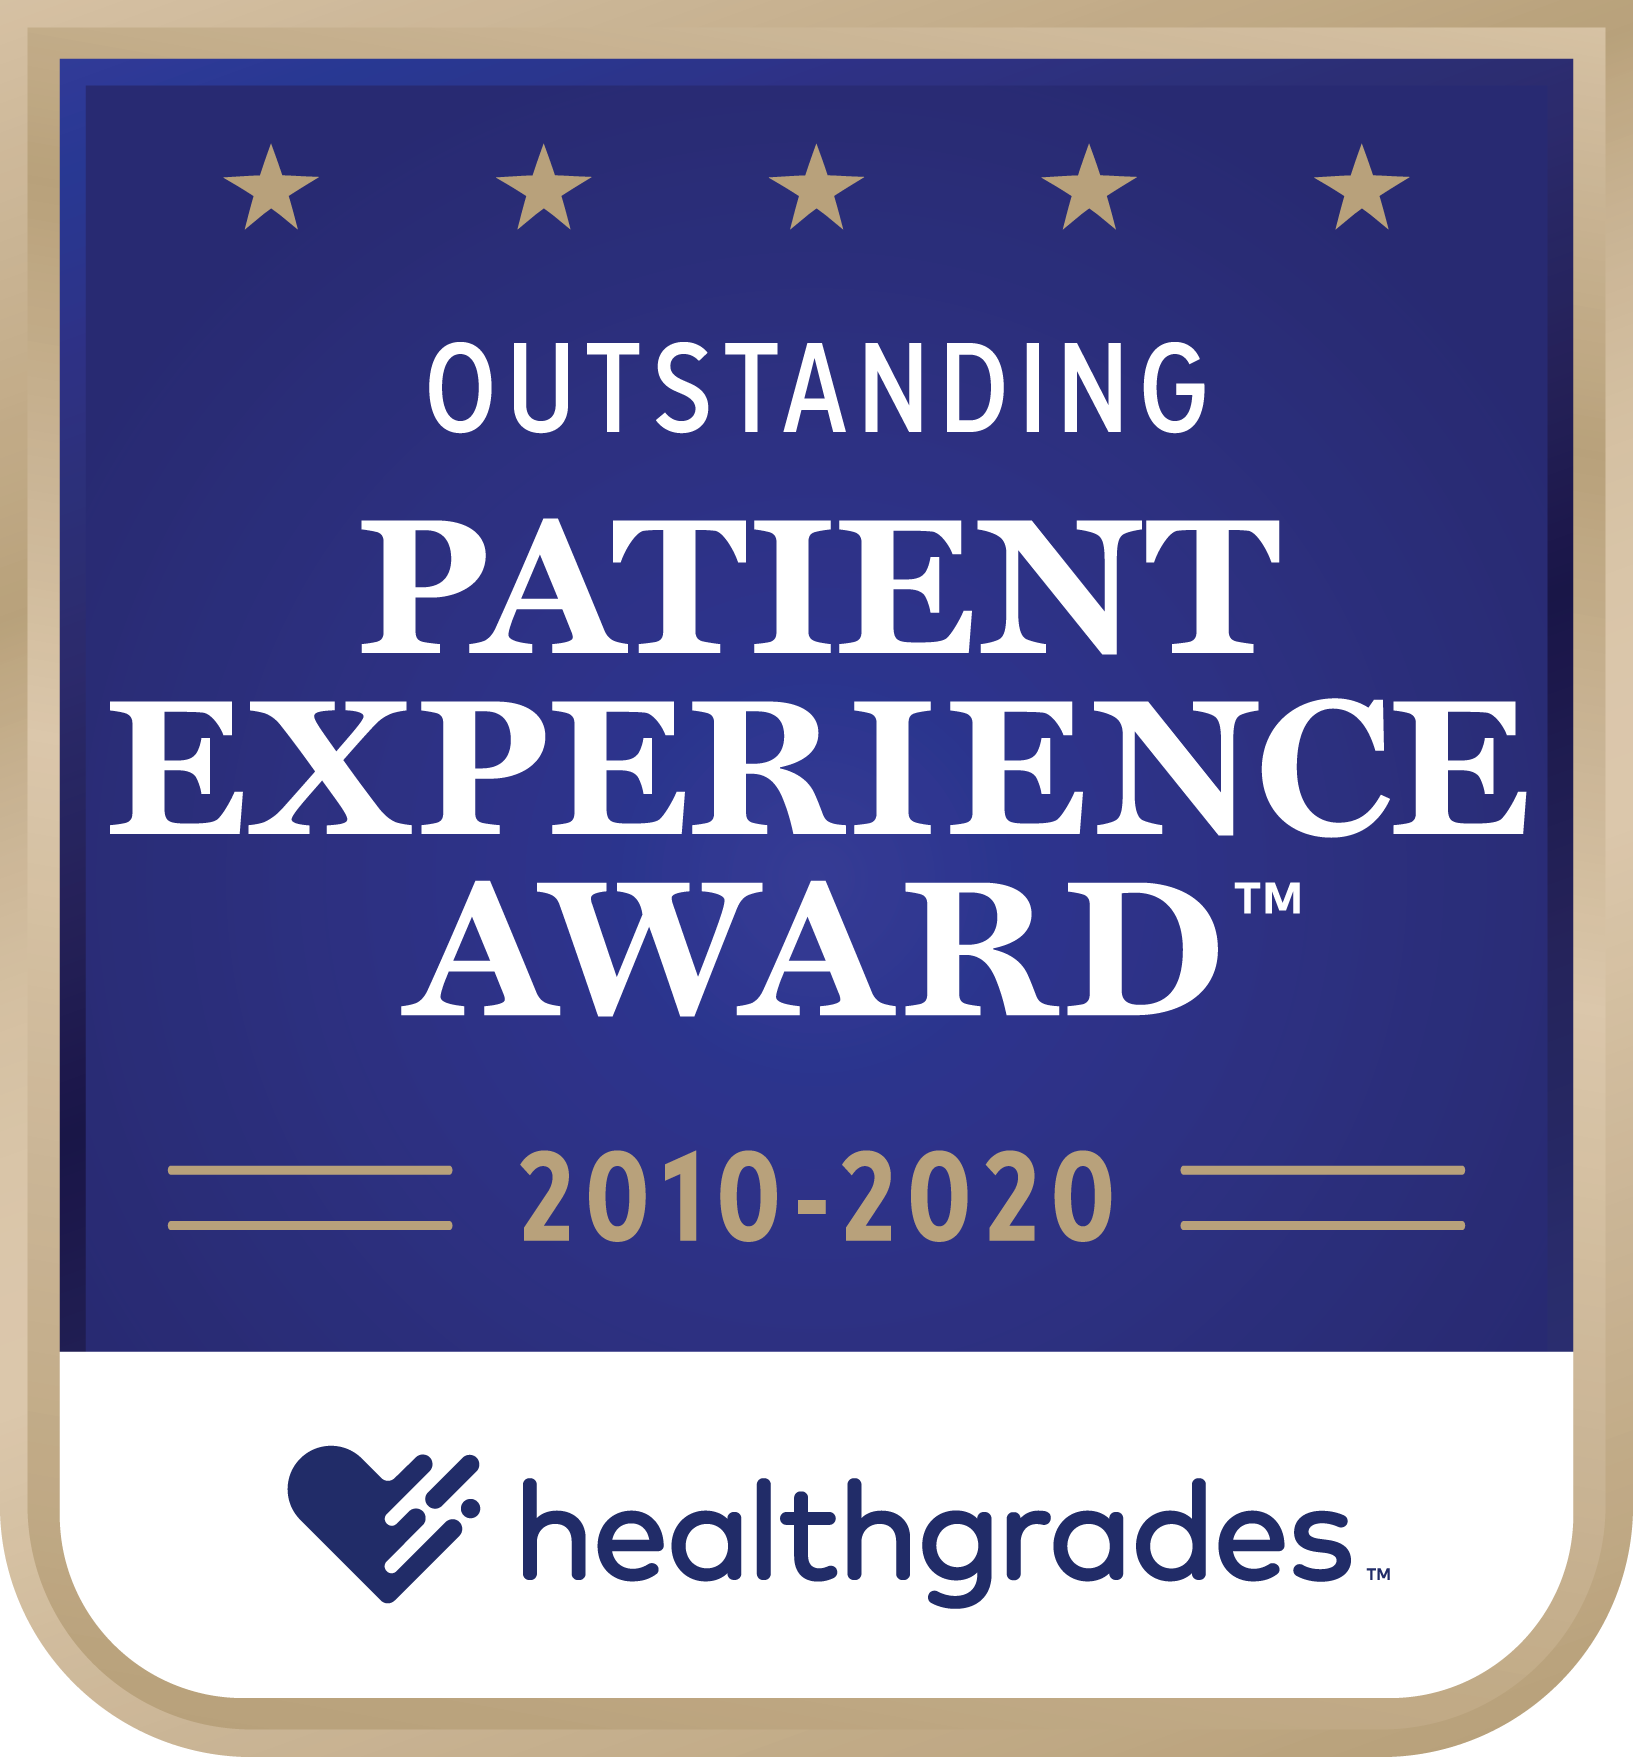 HG_Outstanding_Patient_Experience_Award_Image_2010-2020.png